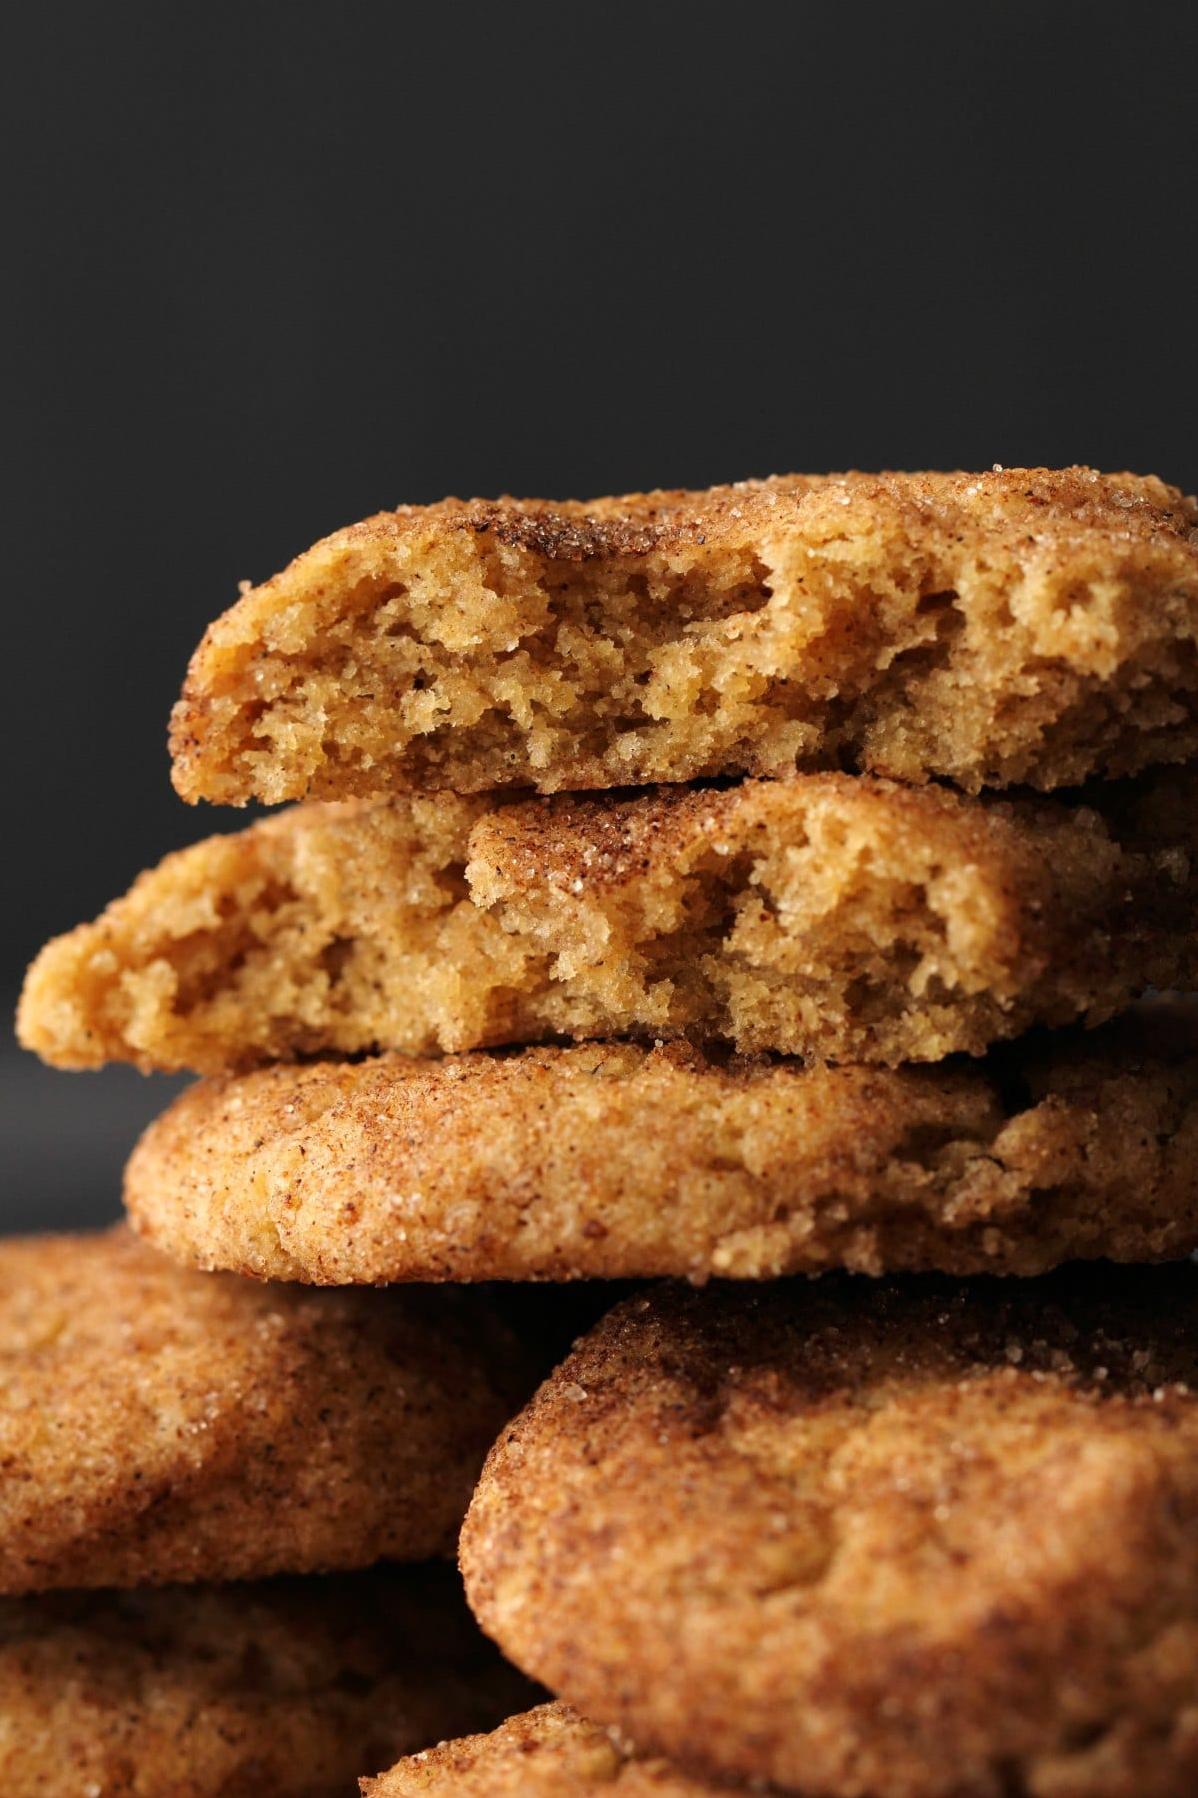  You won't believe how easy it is to make these deliciously dairy-free snickerdoodles!